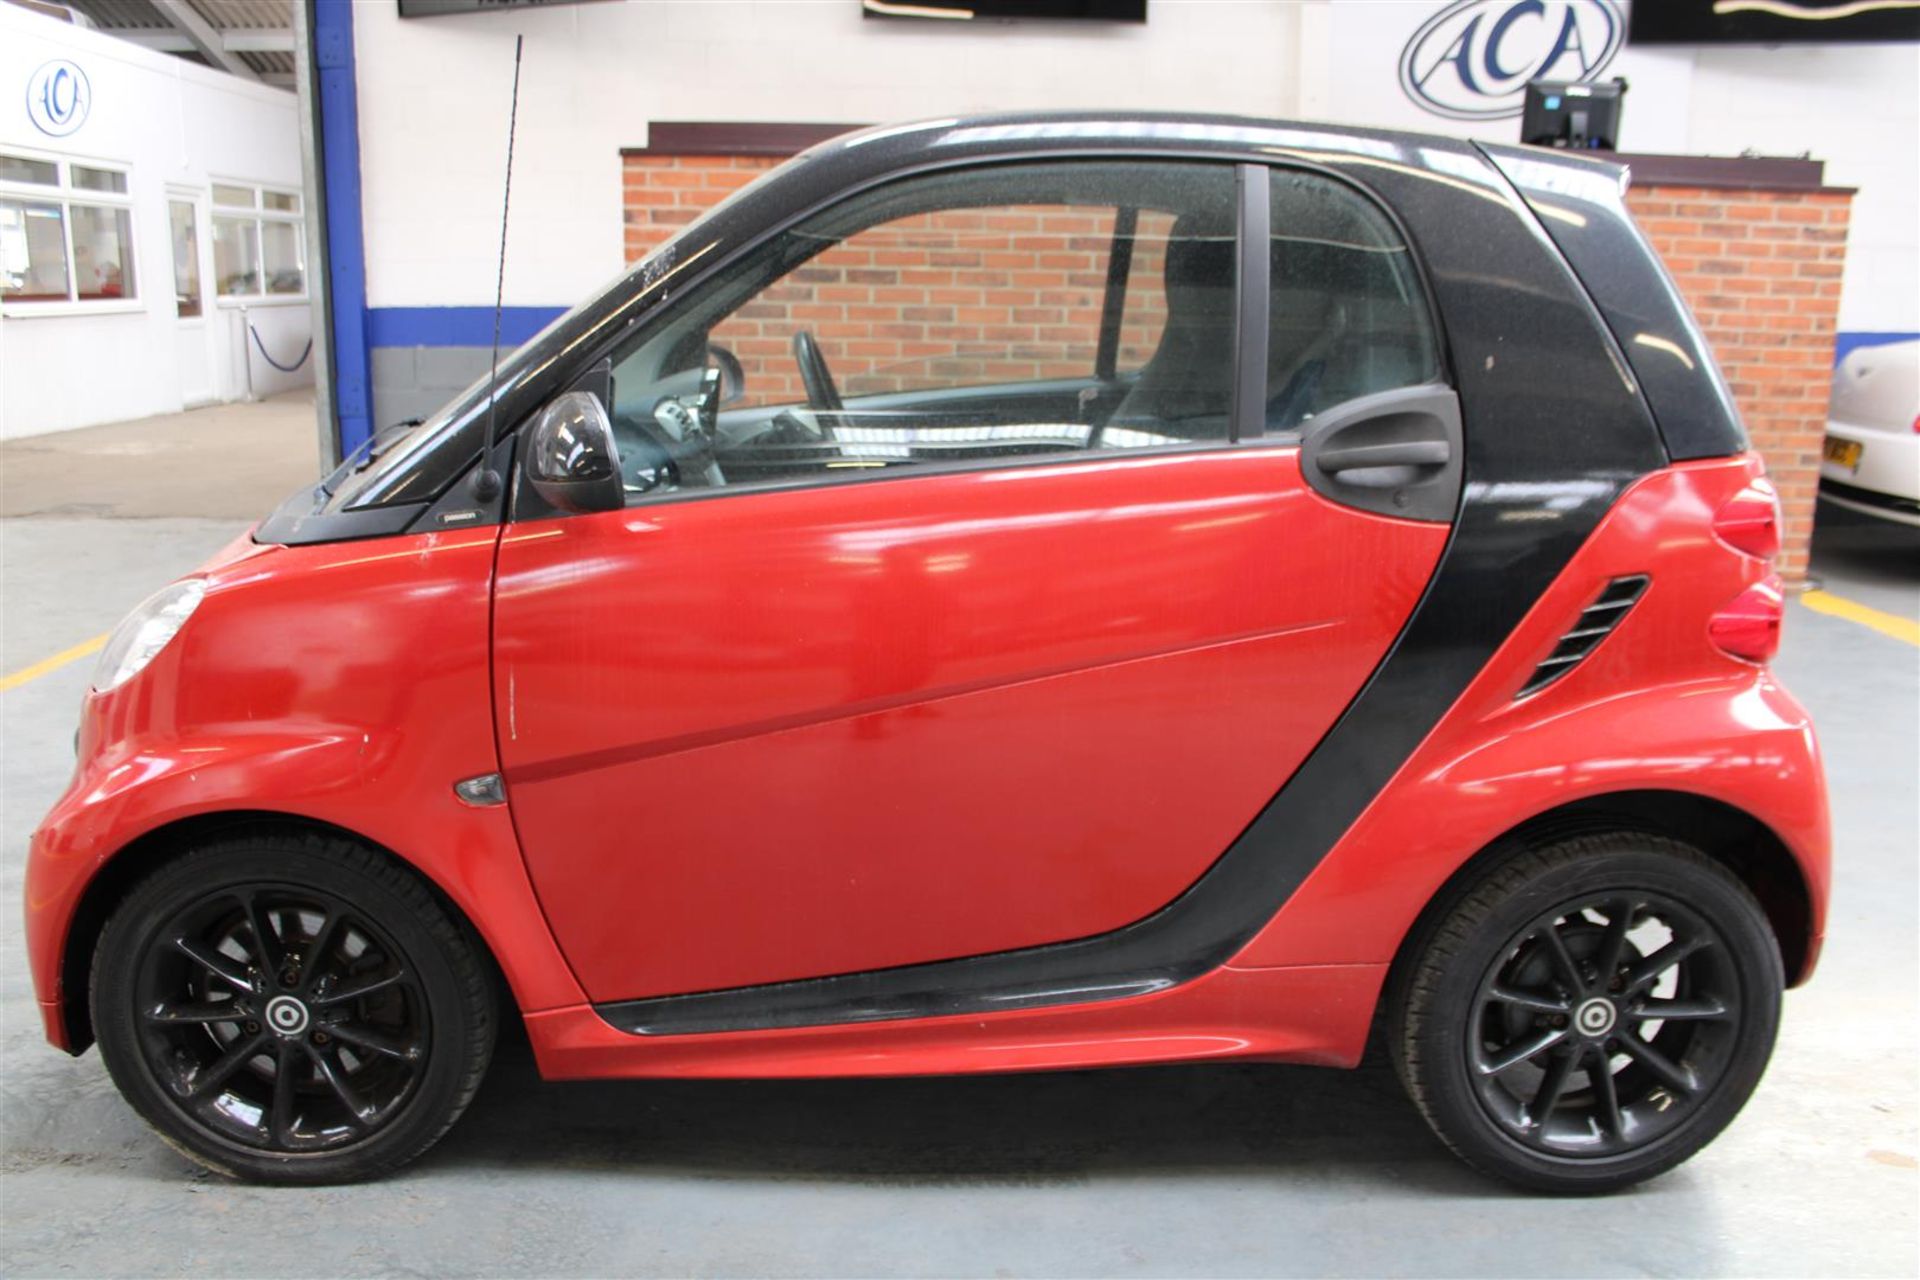 62 12 Smart Fortwo Passion MHD - Image 27 of 27